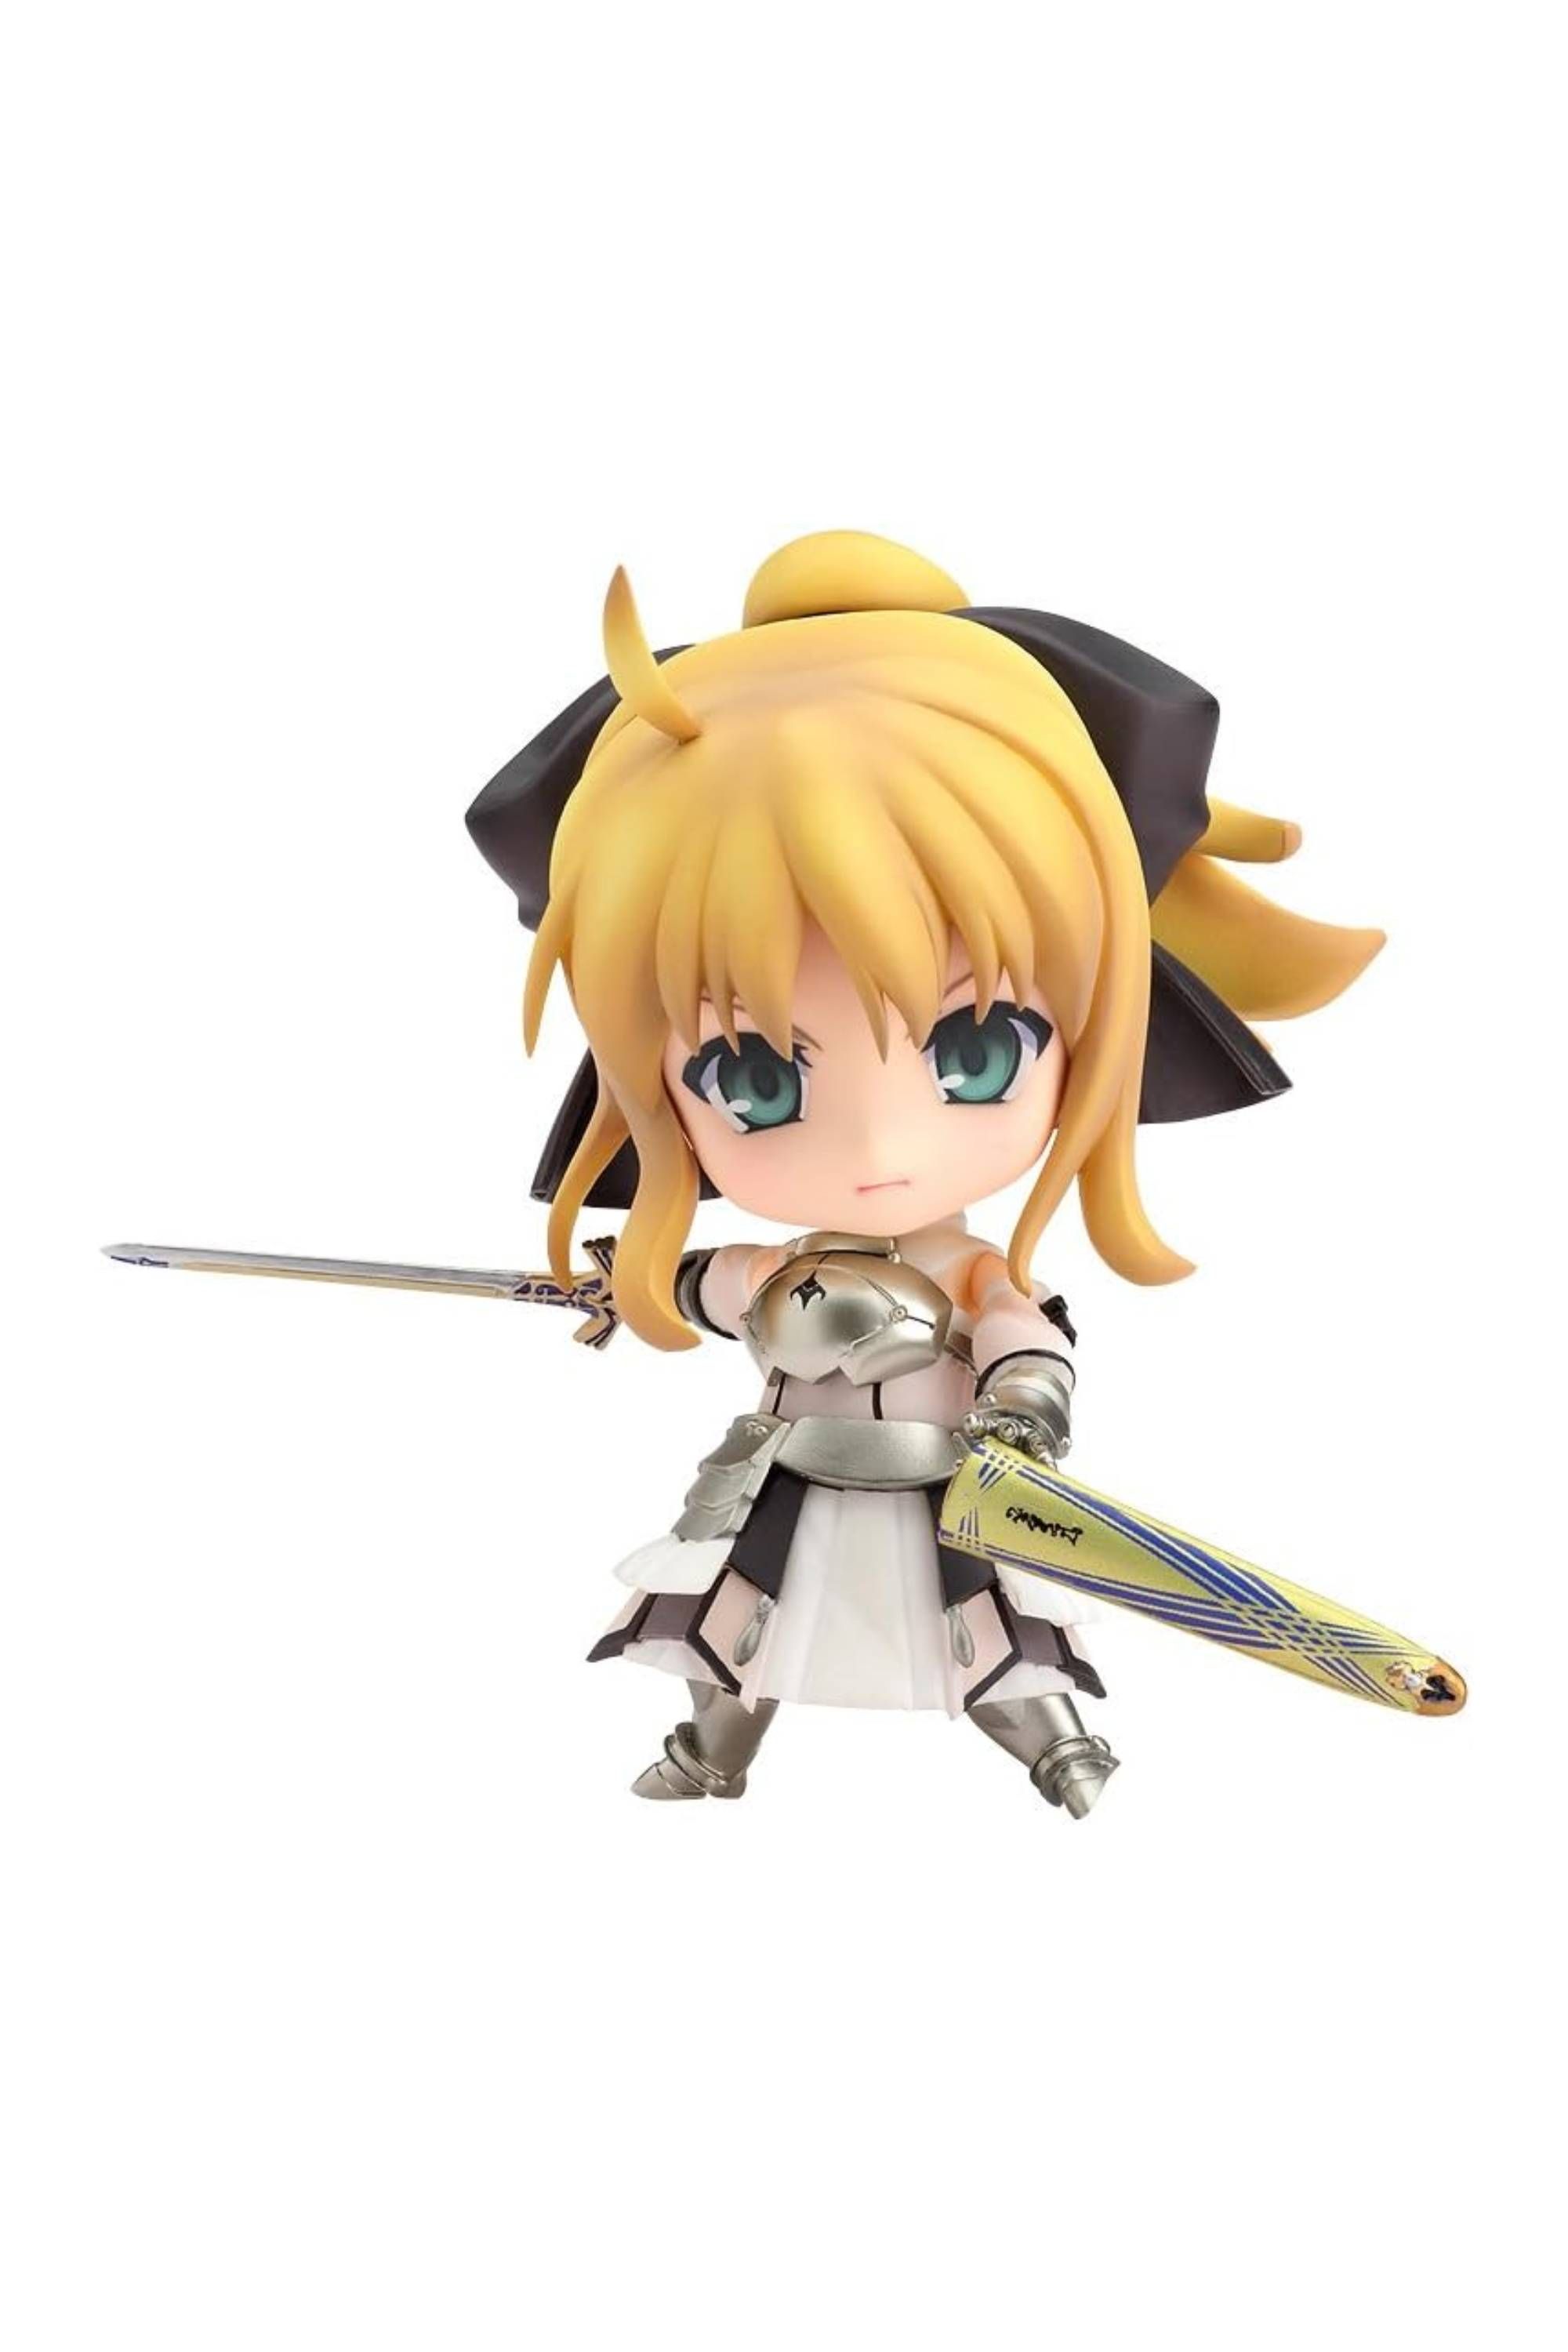 Good Smile Nendoroid_ Fate_Stay Night Saber Lily